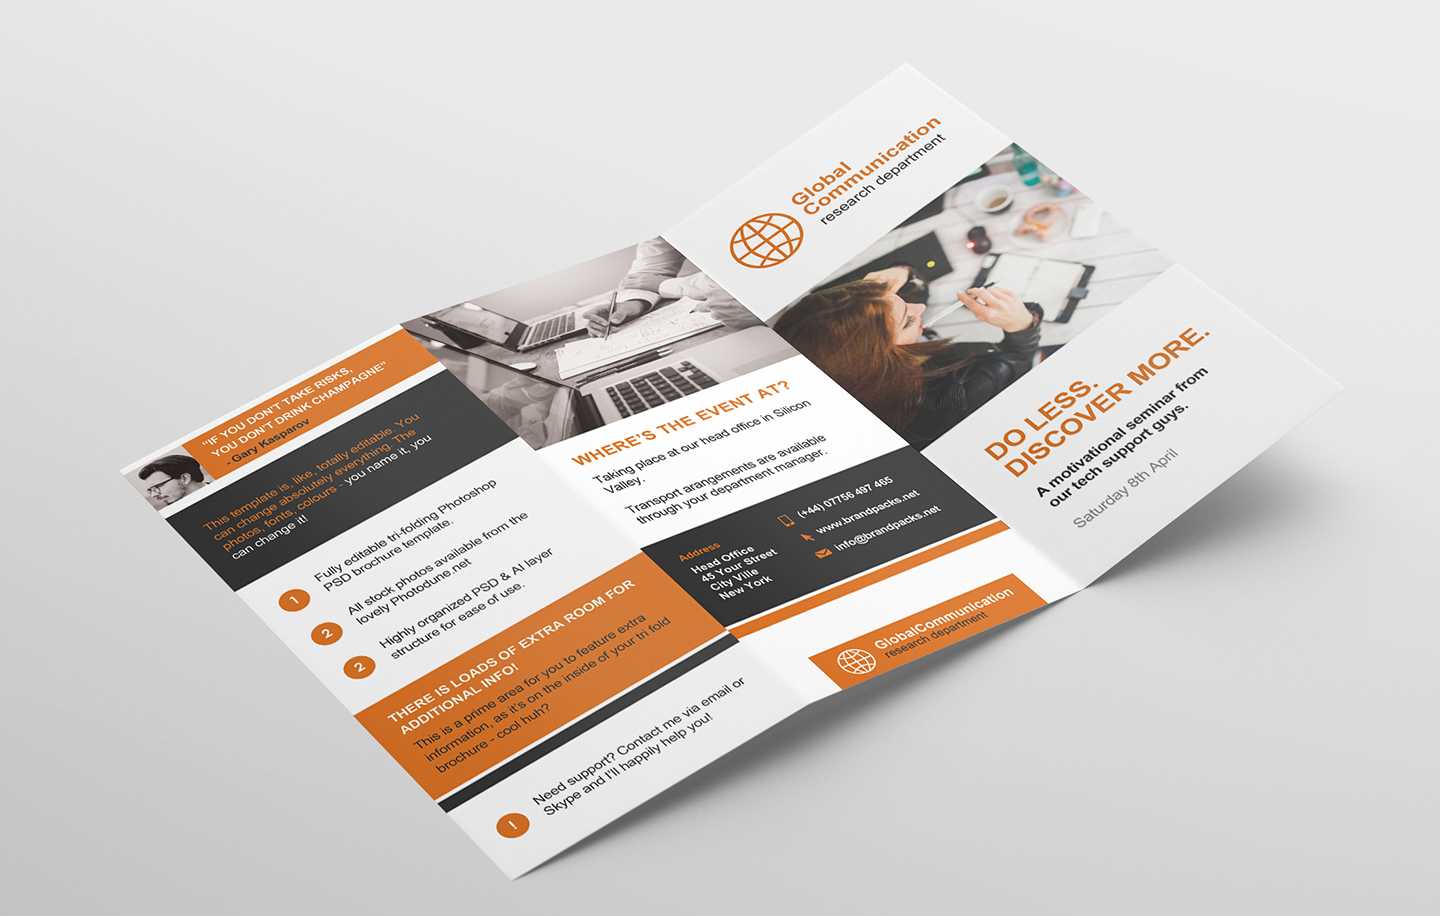 Free 3 Fold Brochure Template For Photoshop & Illustrator Intended For Brochure 3 Fold Template Psd